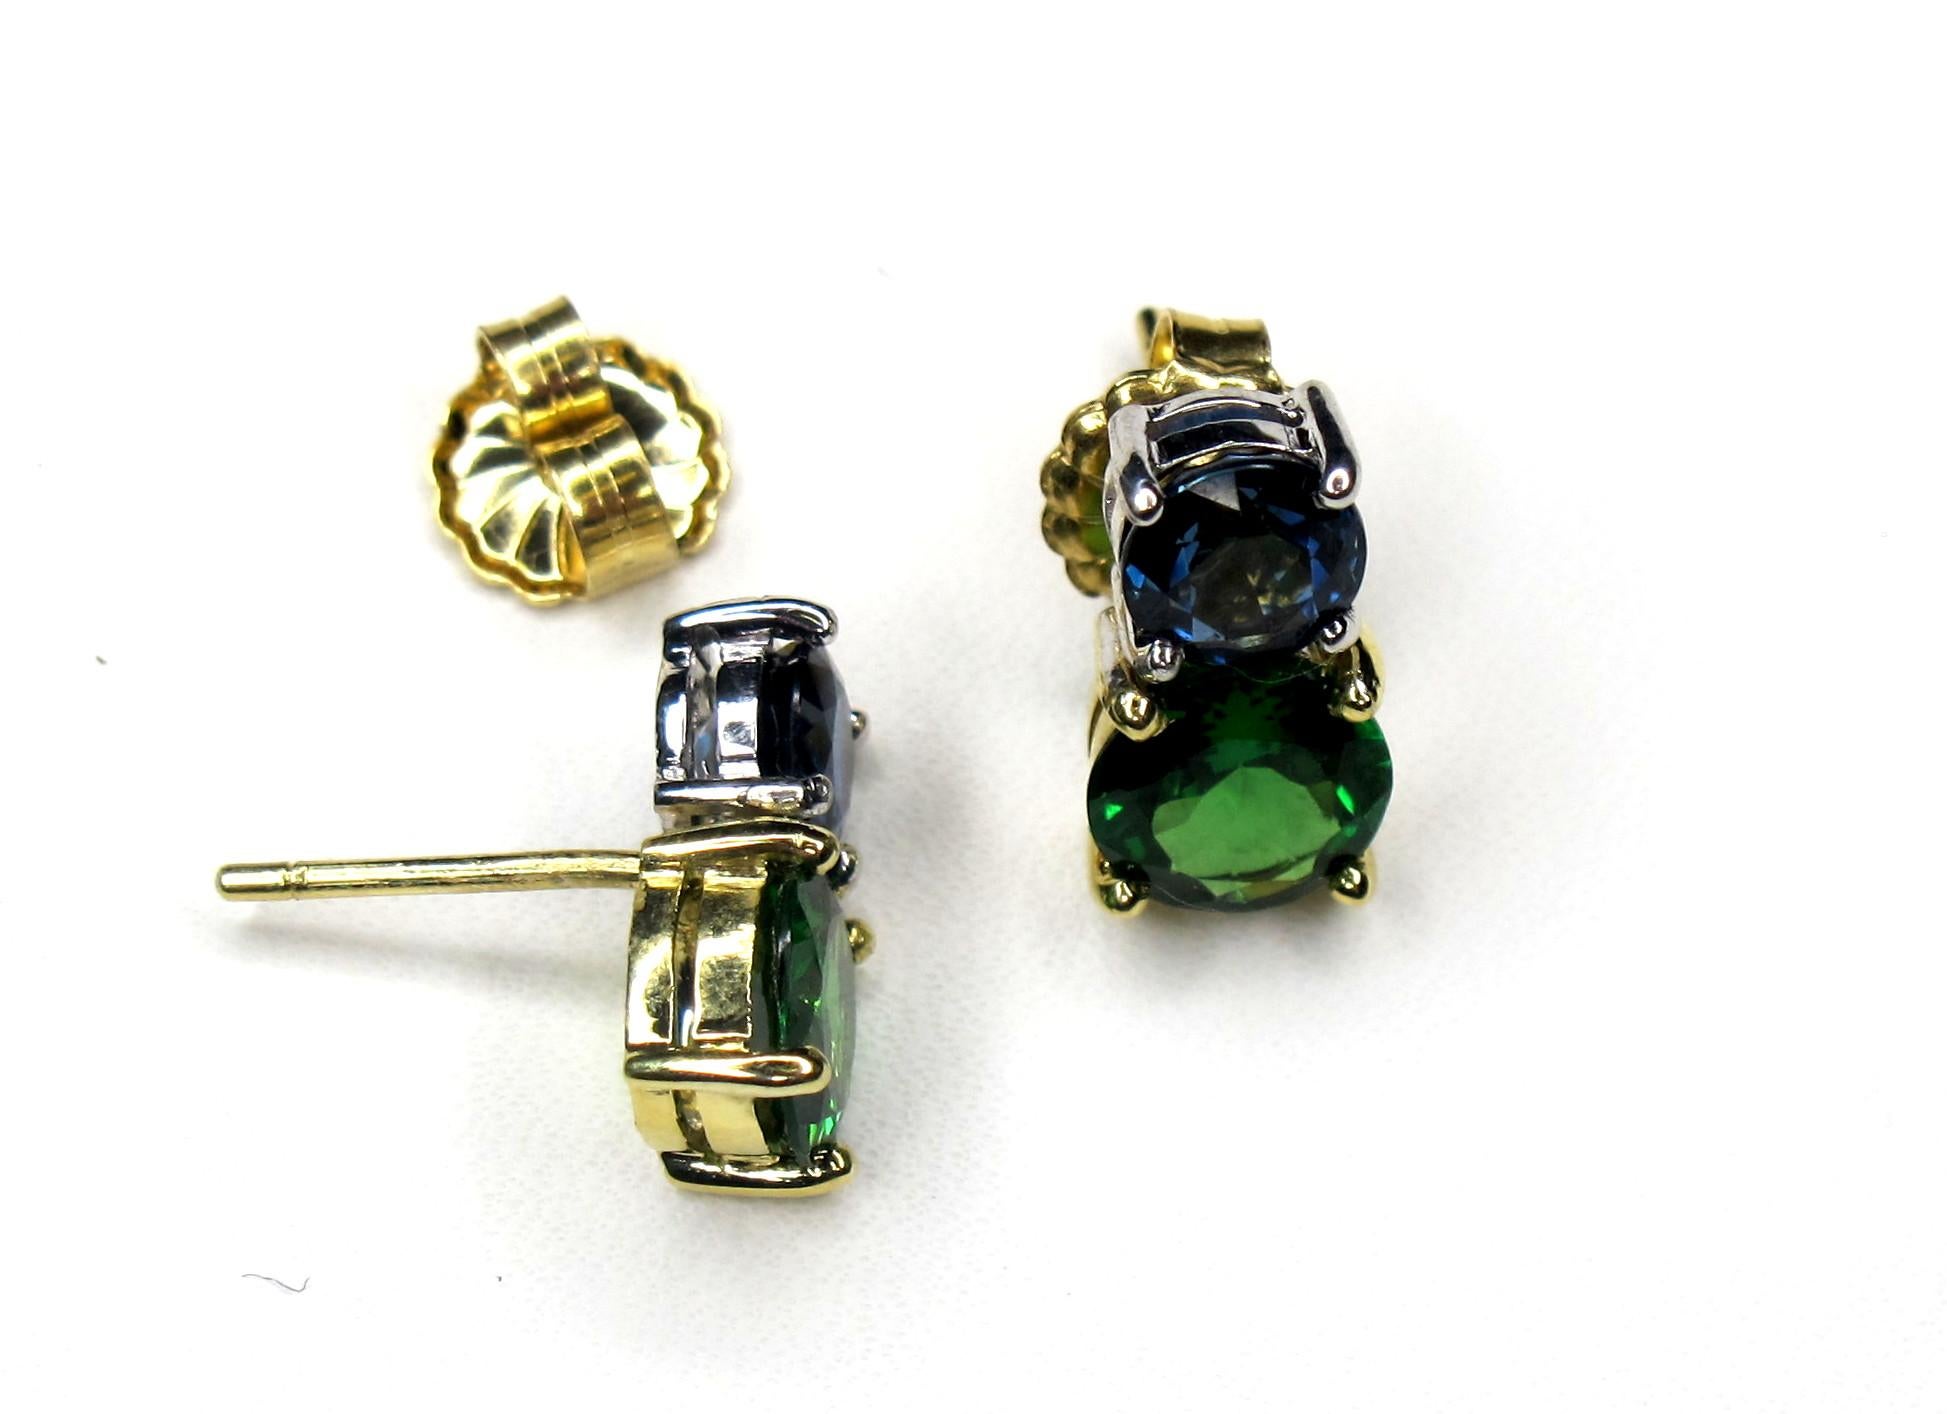 These color-blocked stud earrings are timeless in design but with a modern twist of contemporary color! Two large, matching green tsavorite garnets are paired with two matching blue sapphires to form these unique earrings. The emerald-green color